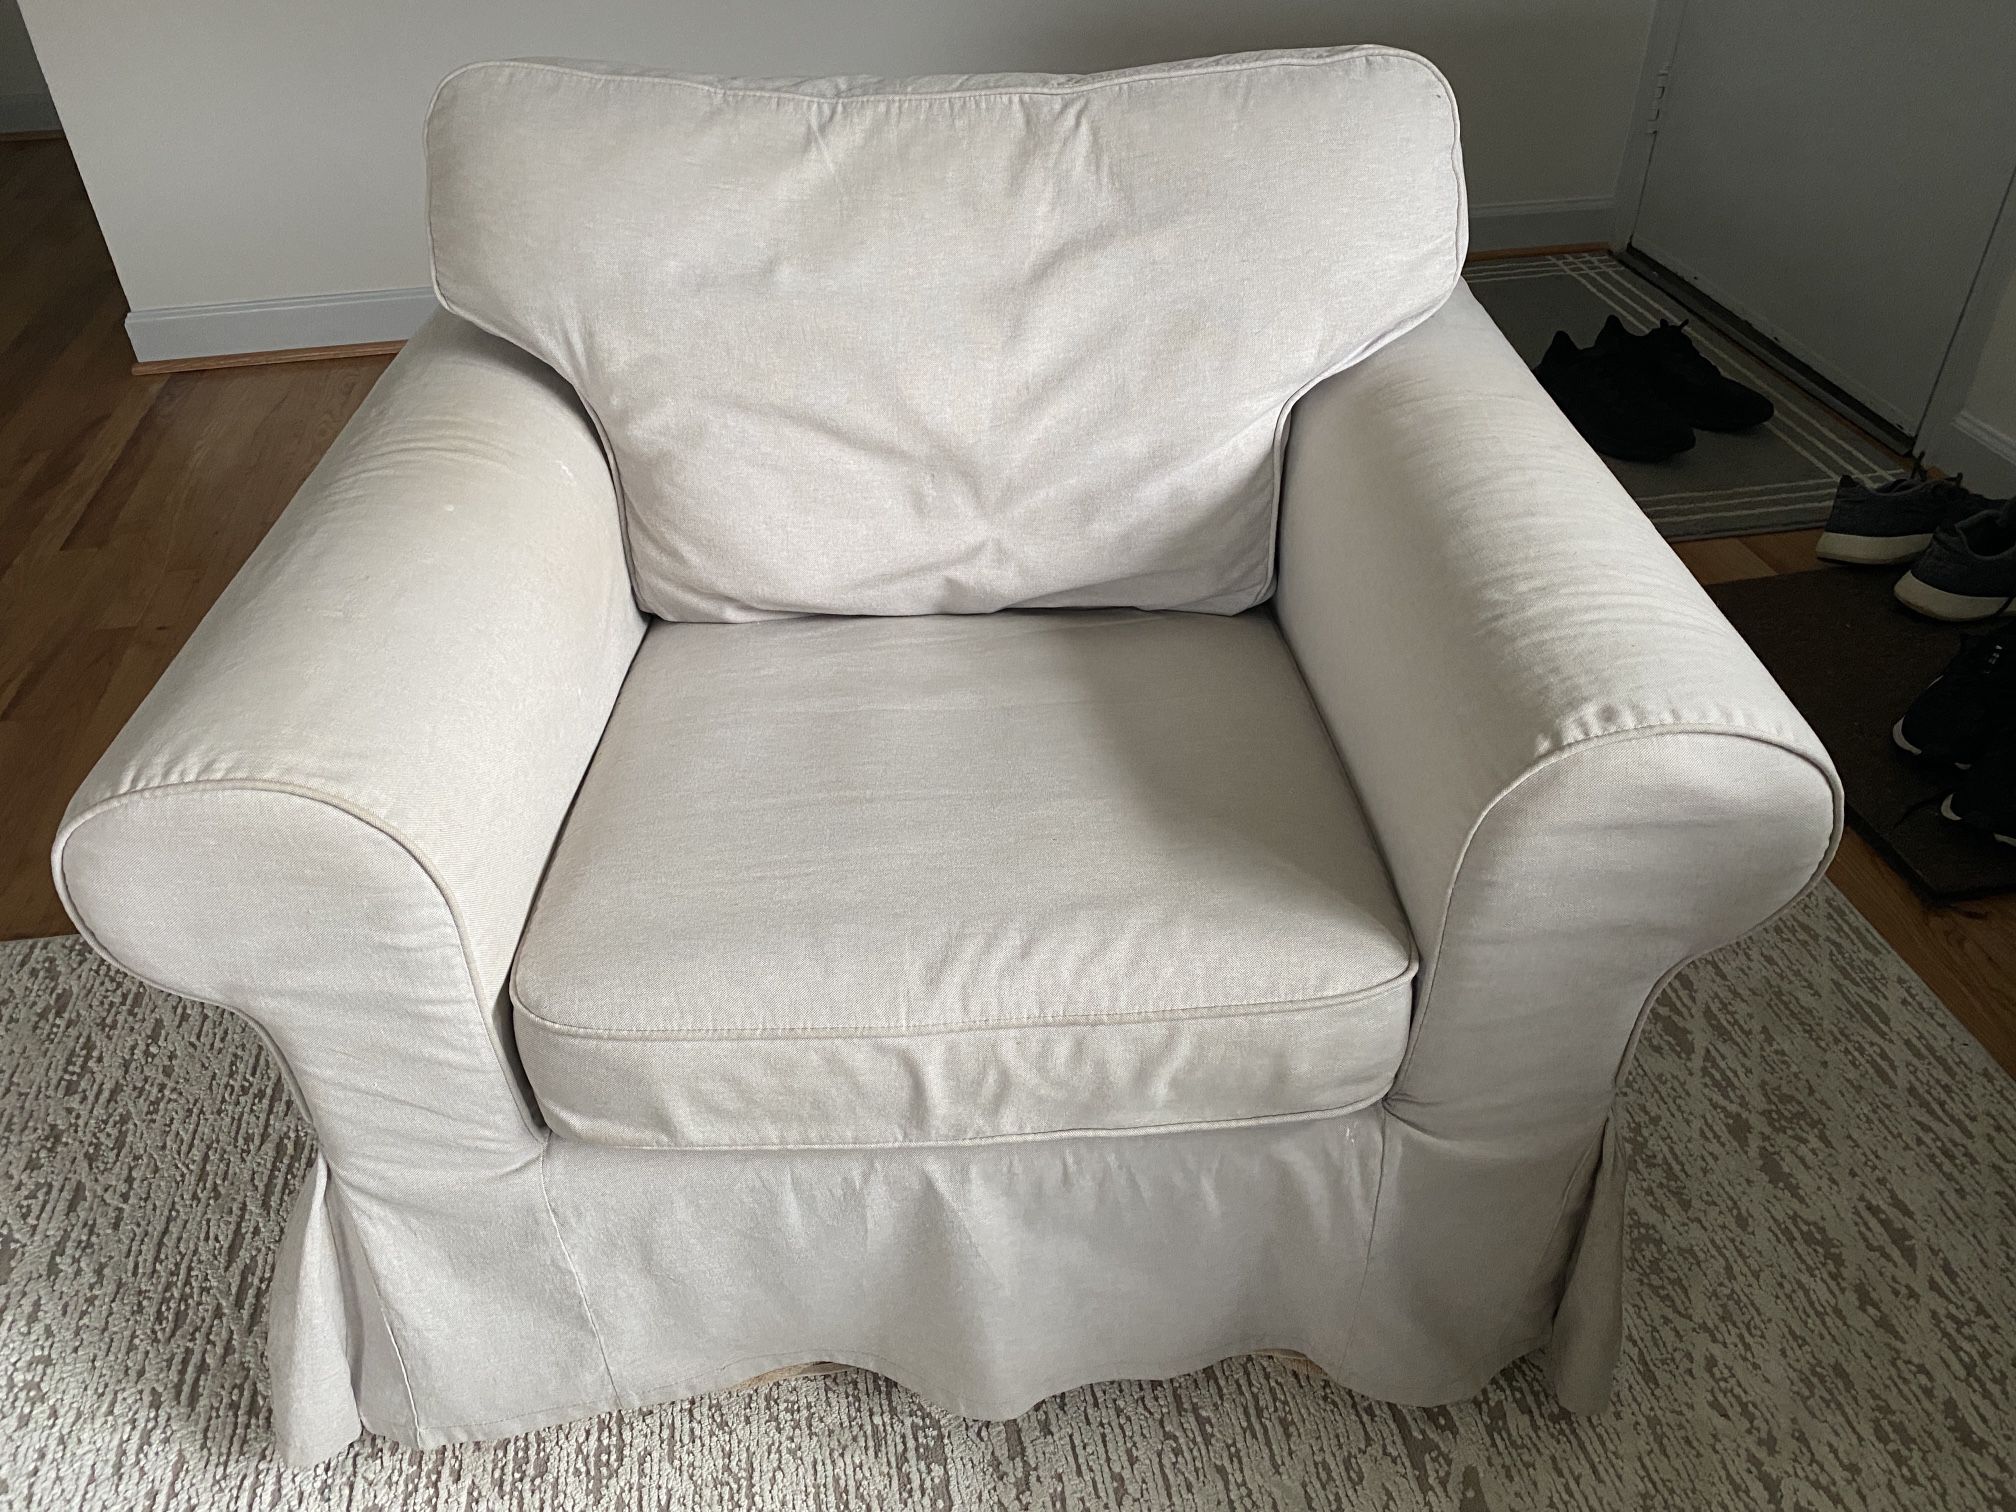 IKEA EKTORP Beige Chair and Slipcover Condition: Excellent 10/10 